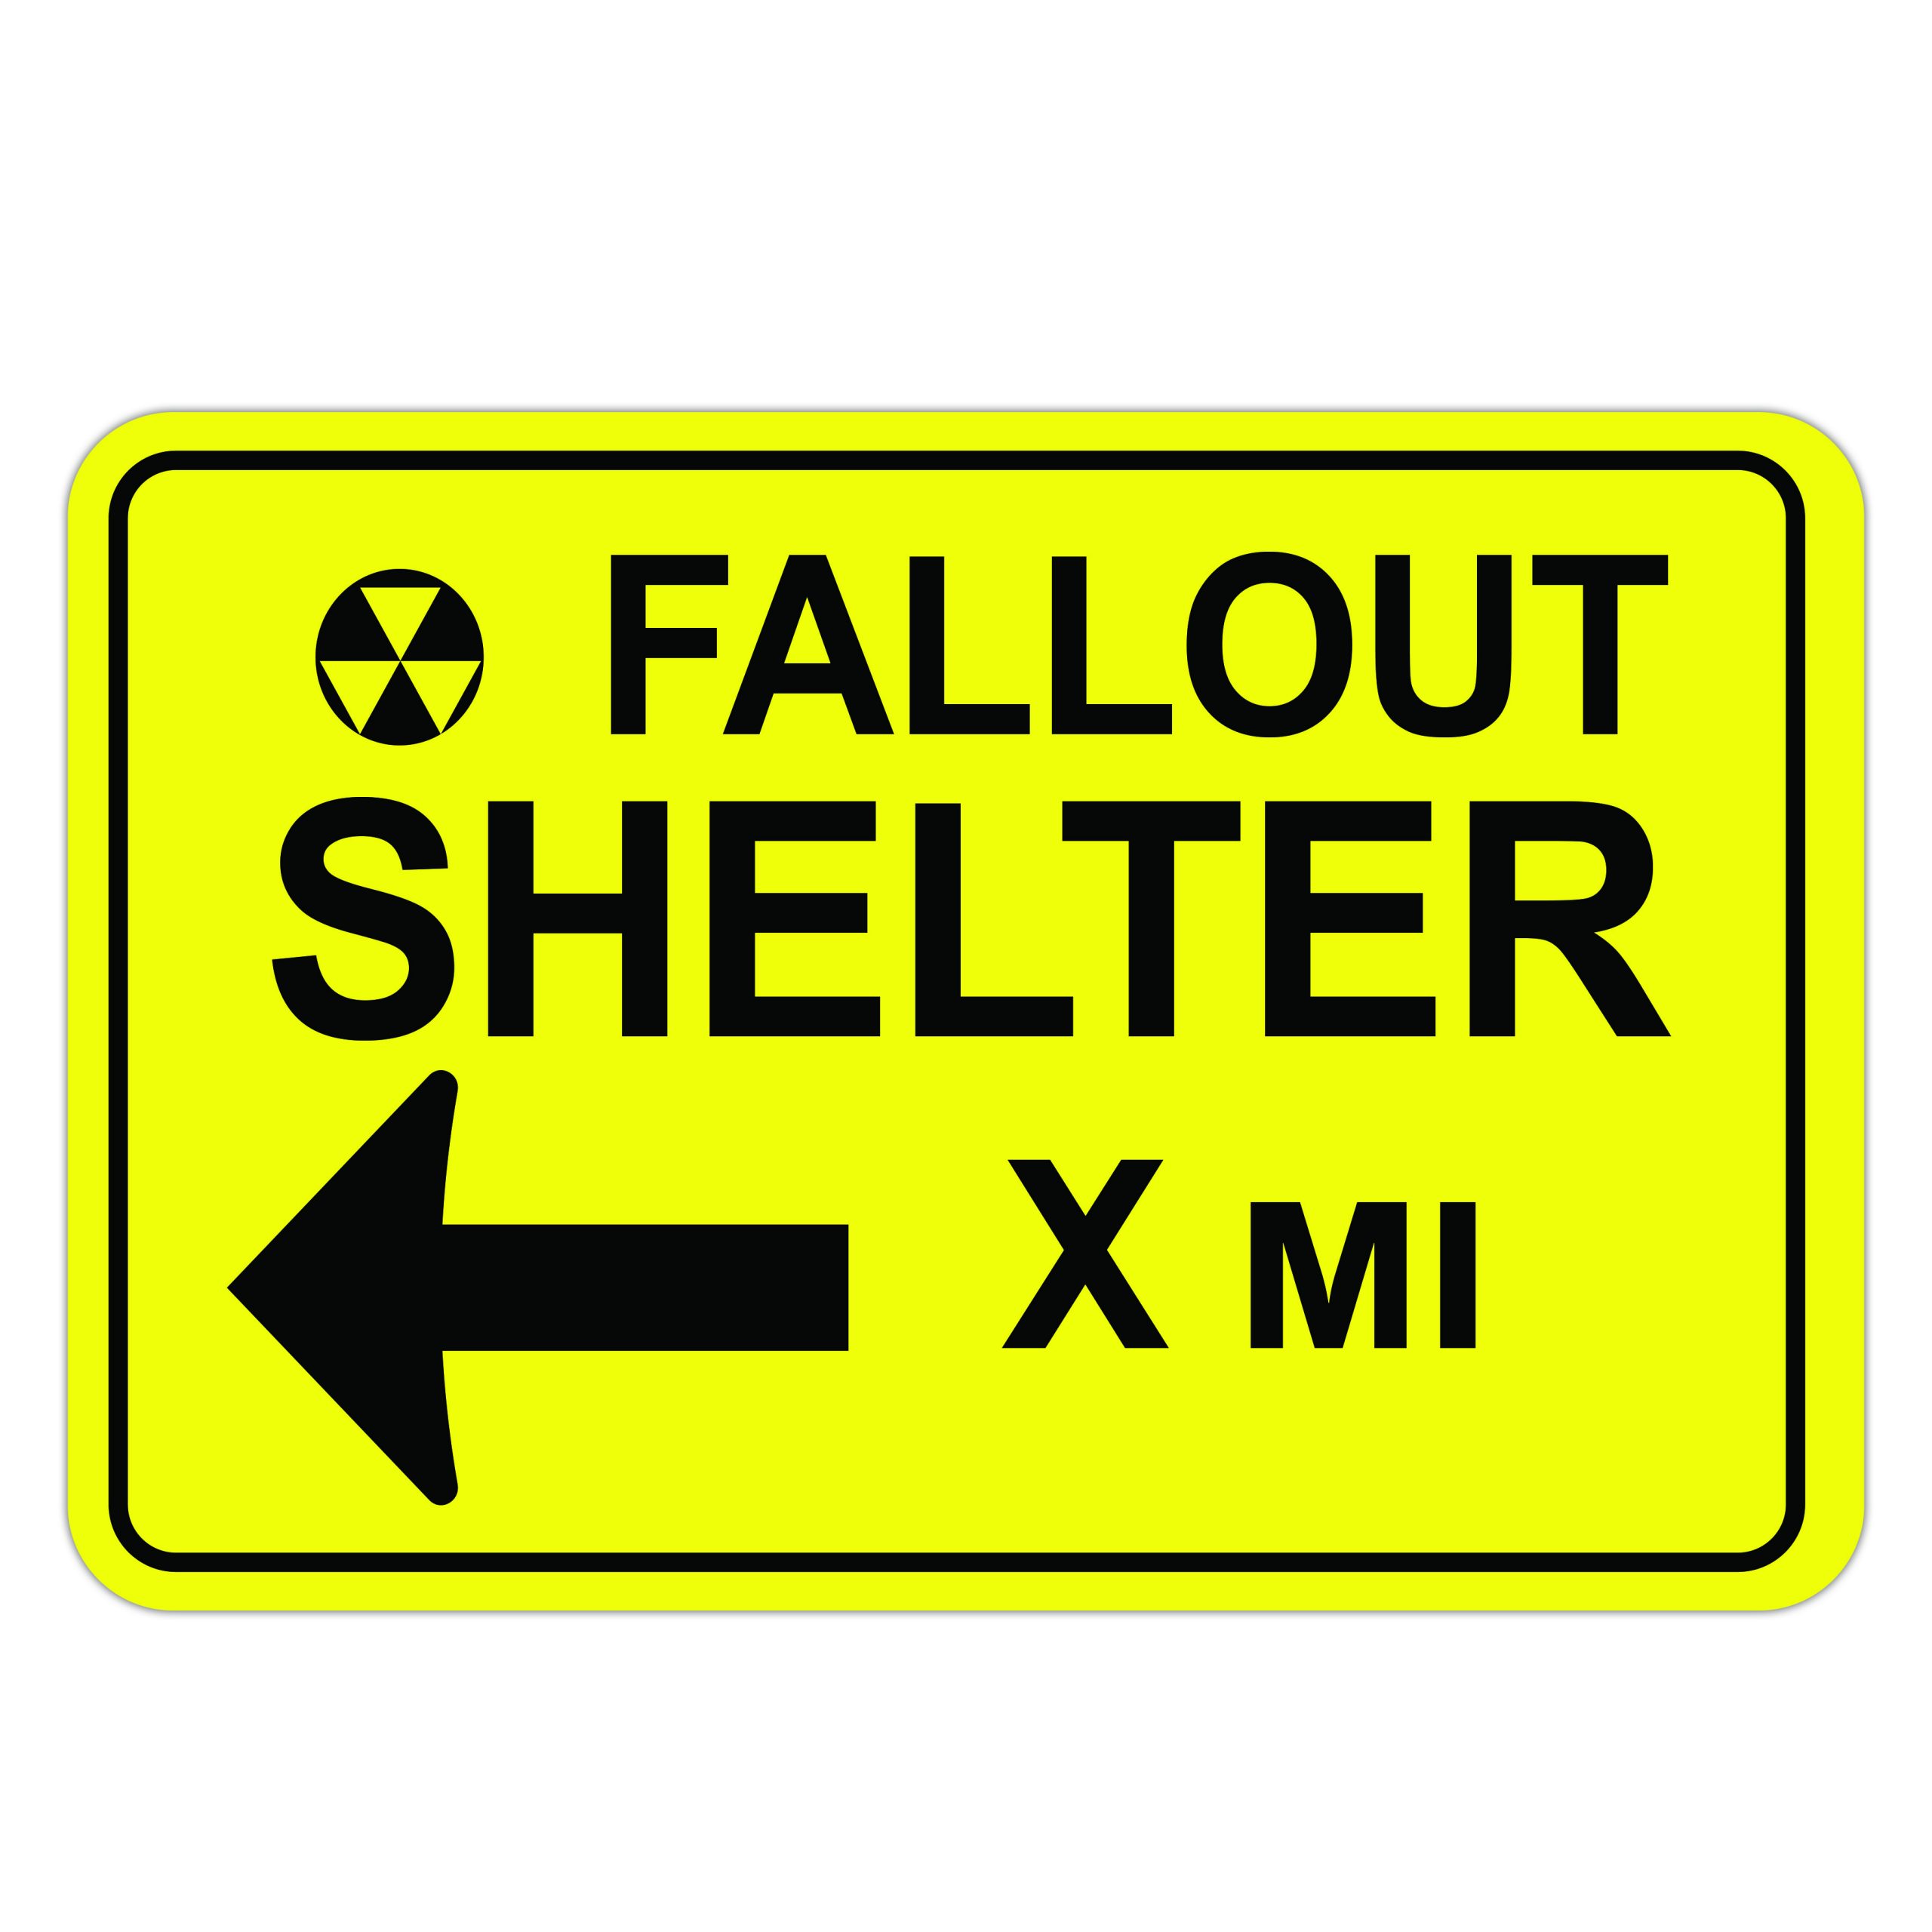 how to sign in to fallout shelter